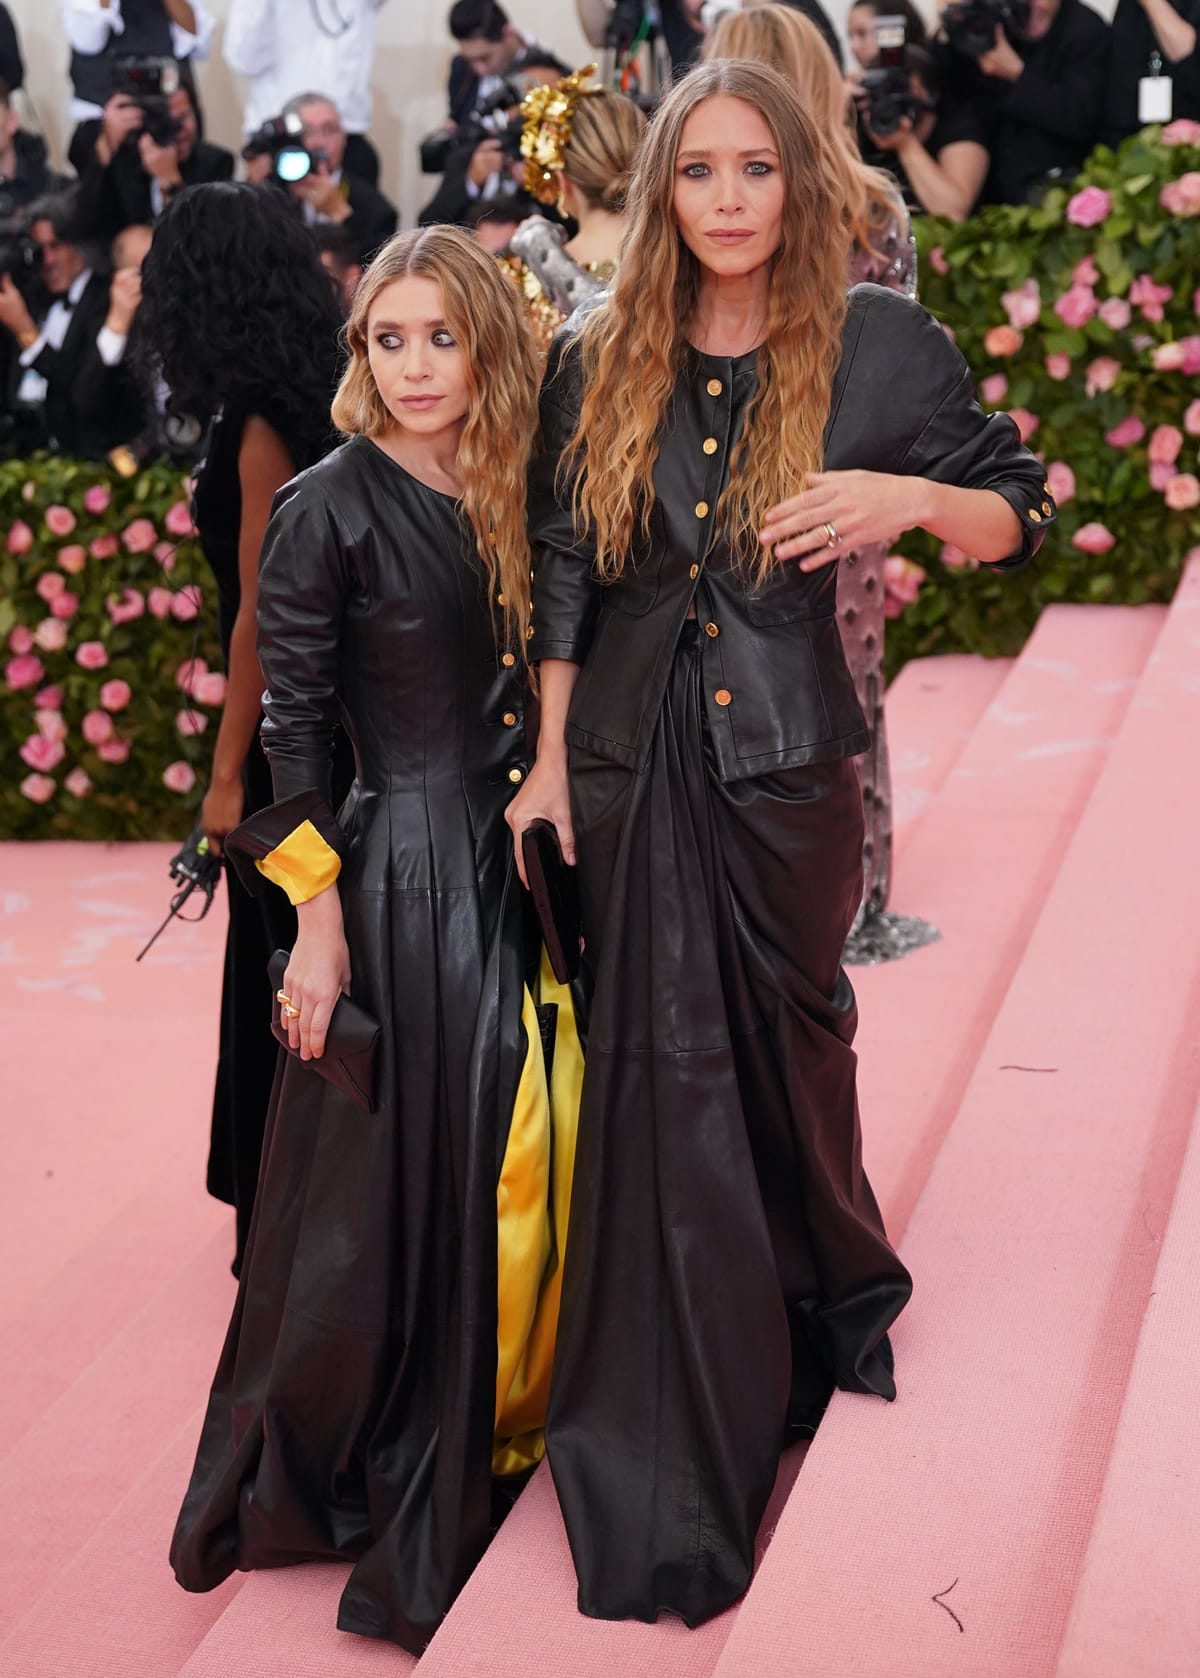 Ashley Olsen is about half an inch taller than Mary-Kate, with heights of 4 feet 11.5 inches and 4 feet 11 inches, respectively